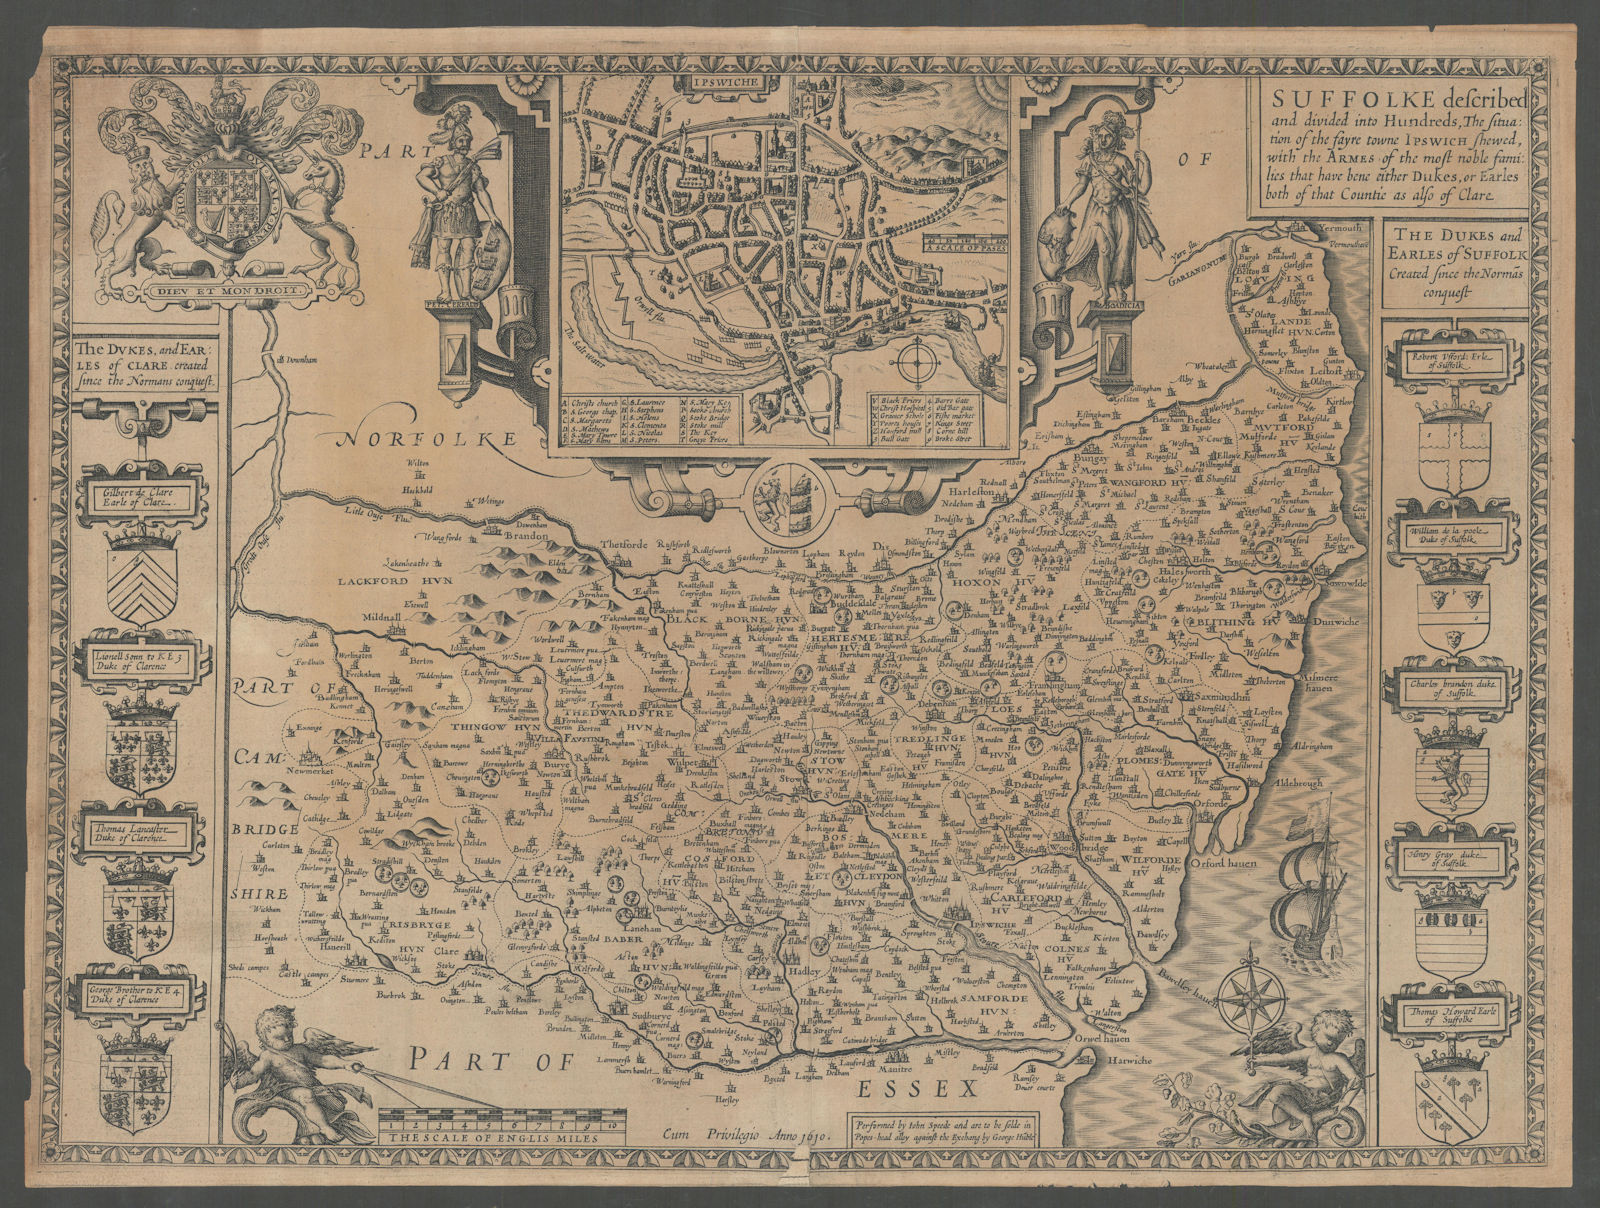 Associate Product Suffolke described. Suffolk county map by John Speed. George Humble edition 1611